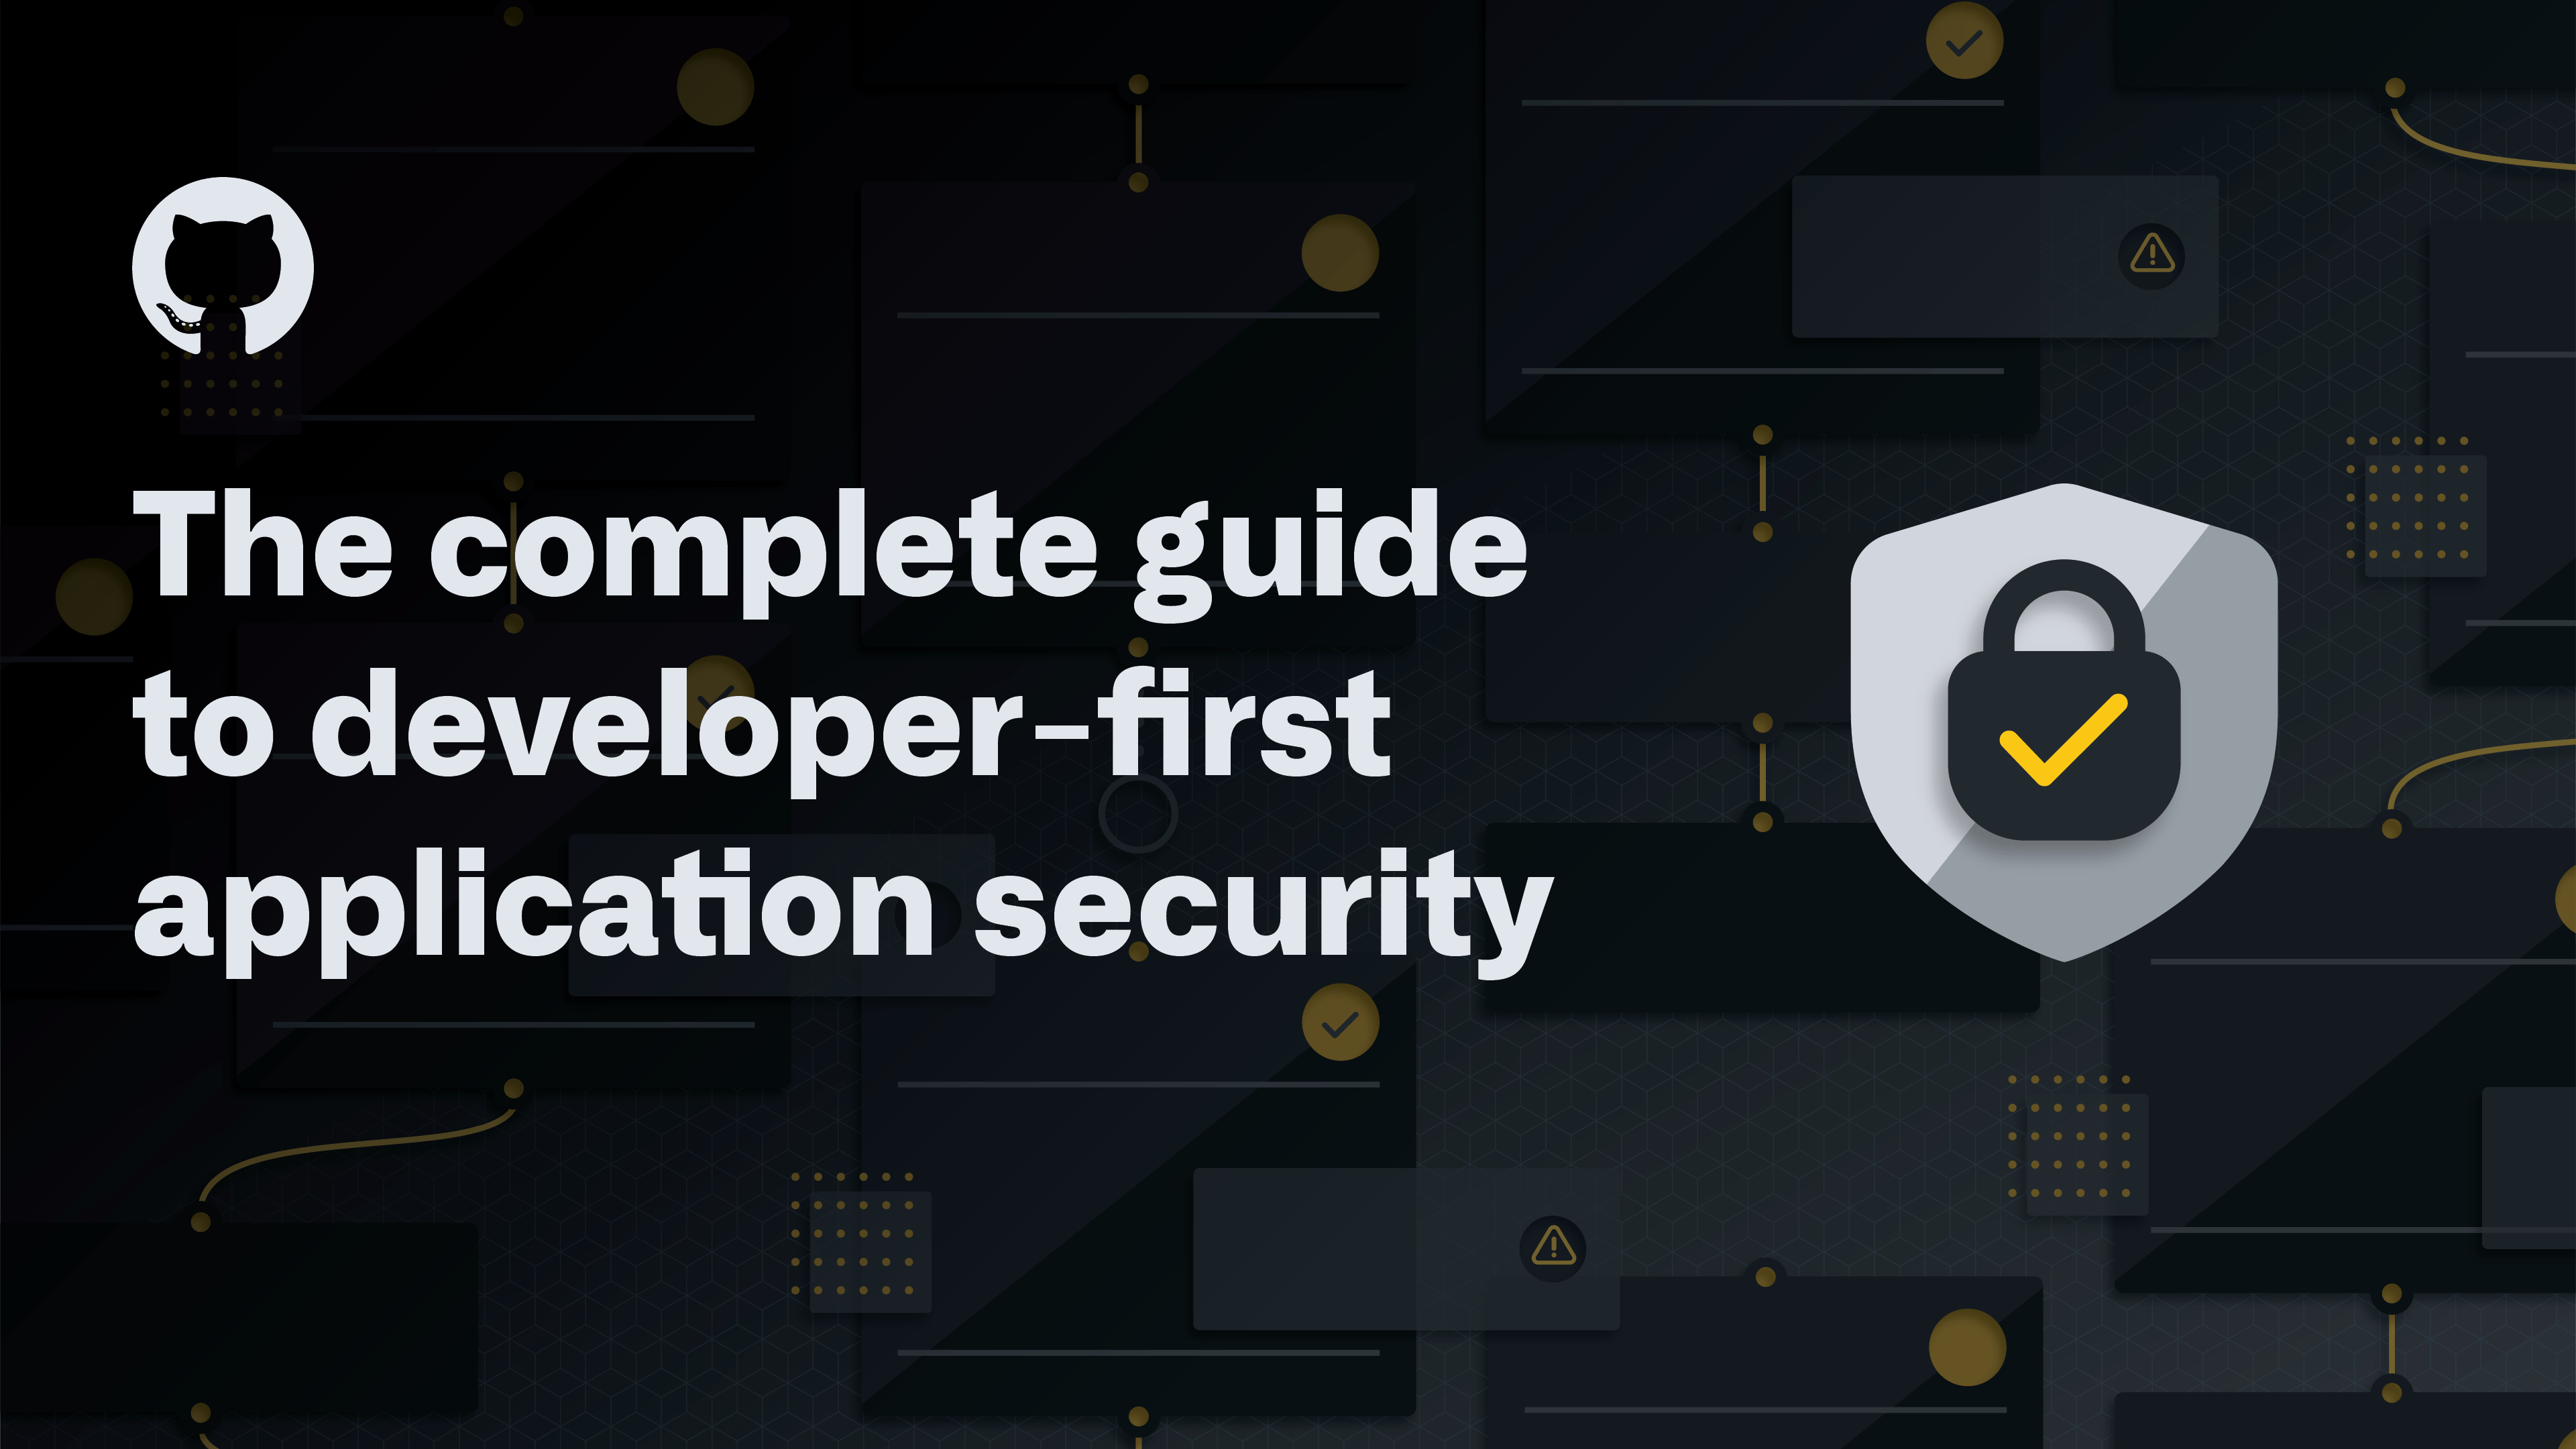 Developer-first security: The next step for DevSecOps